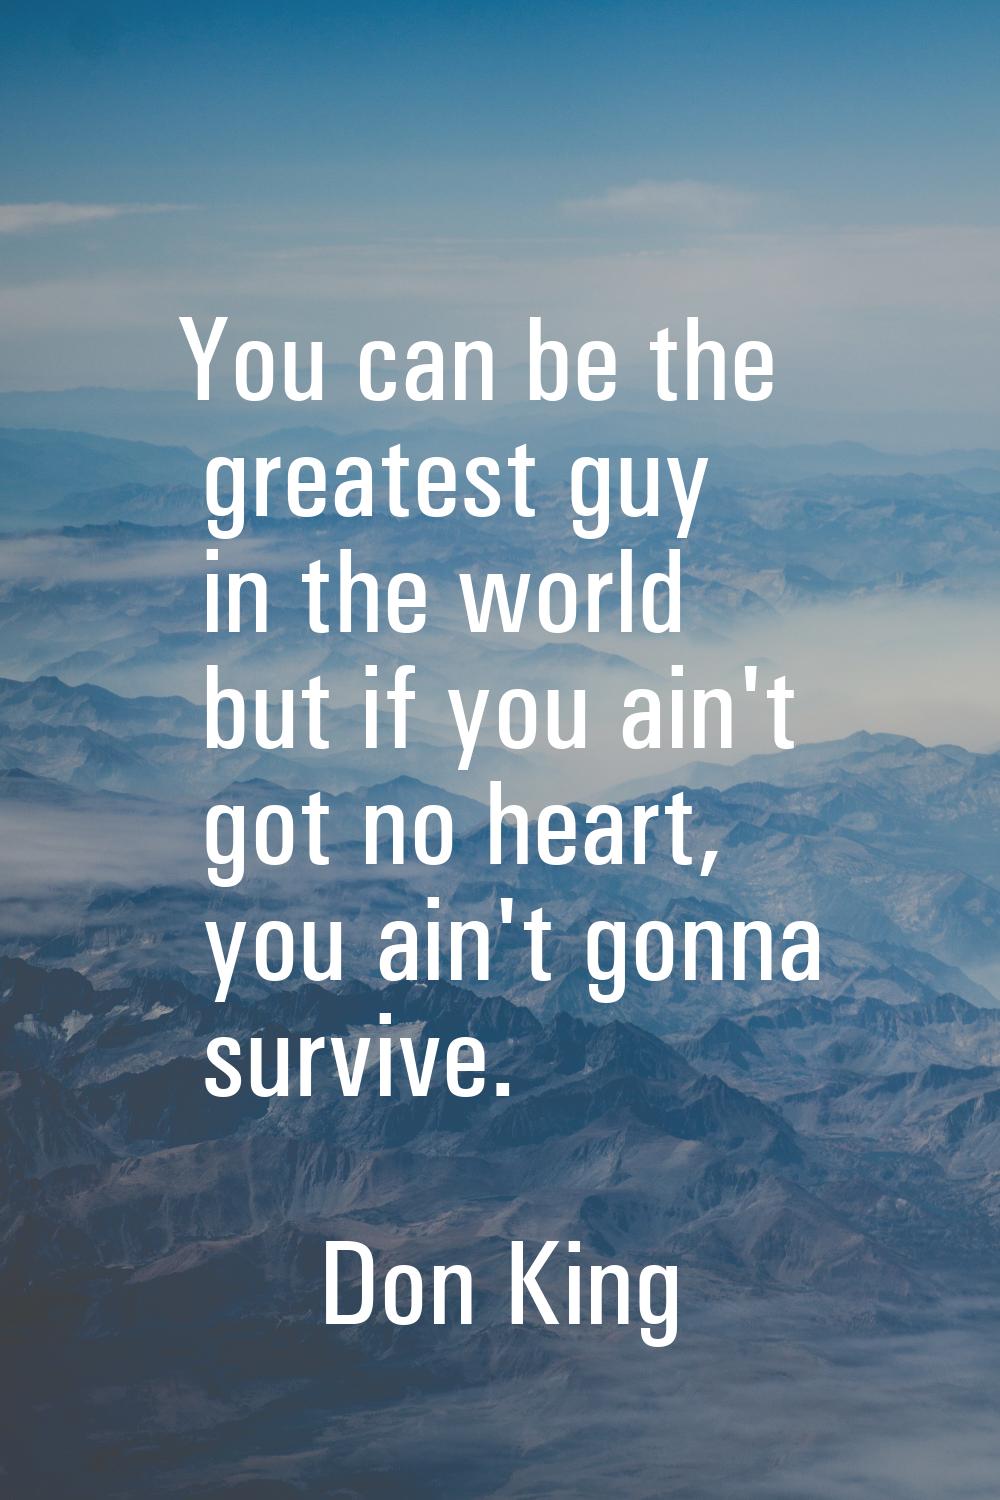 You can be the greatest guy in the world but if you ain't got no heart, you ain't gonna survive.